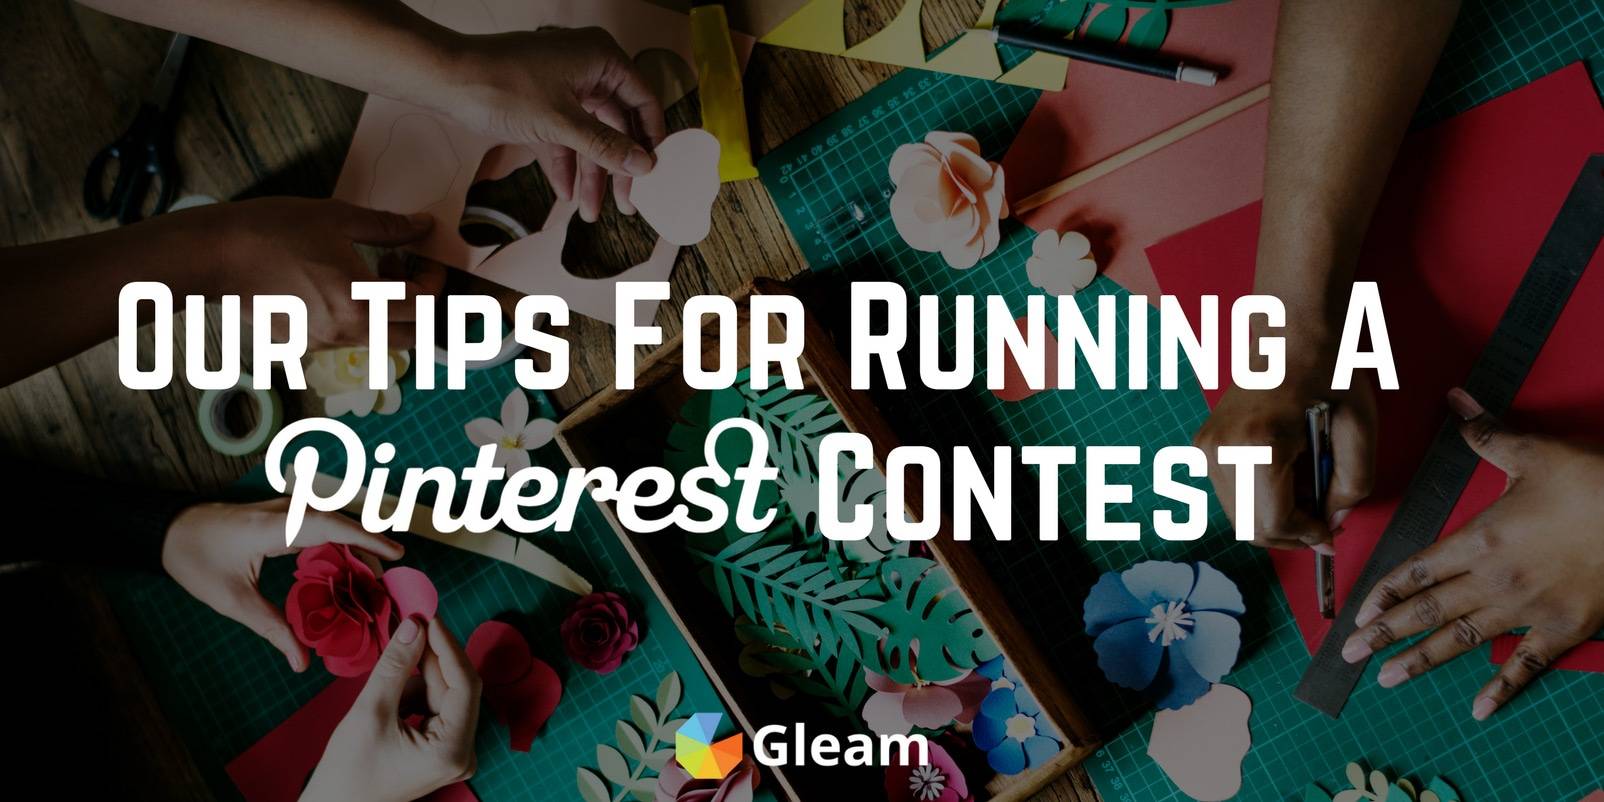 Our Tips for Running a Pinterest Contest